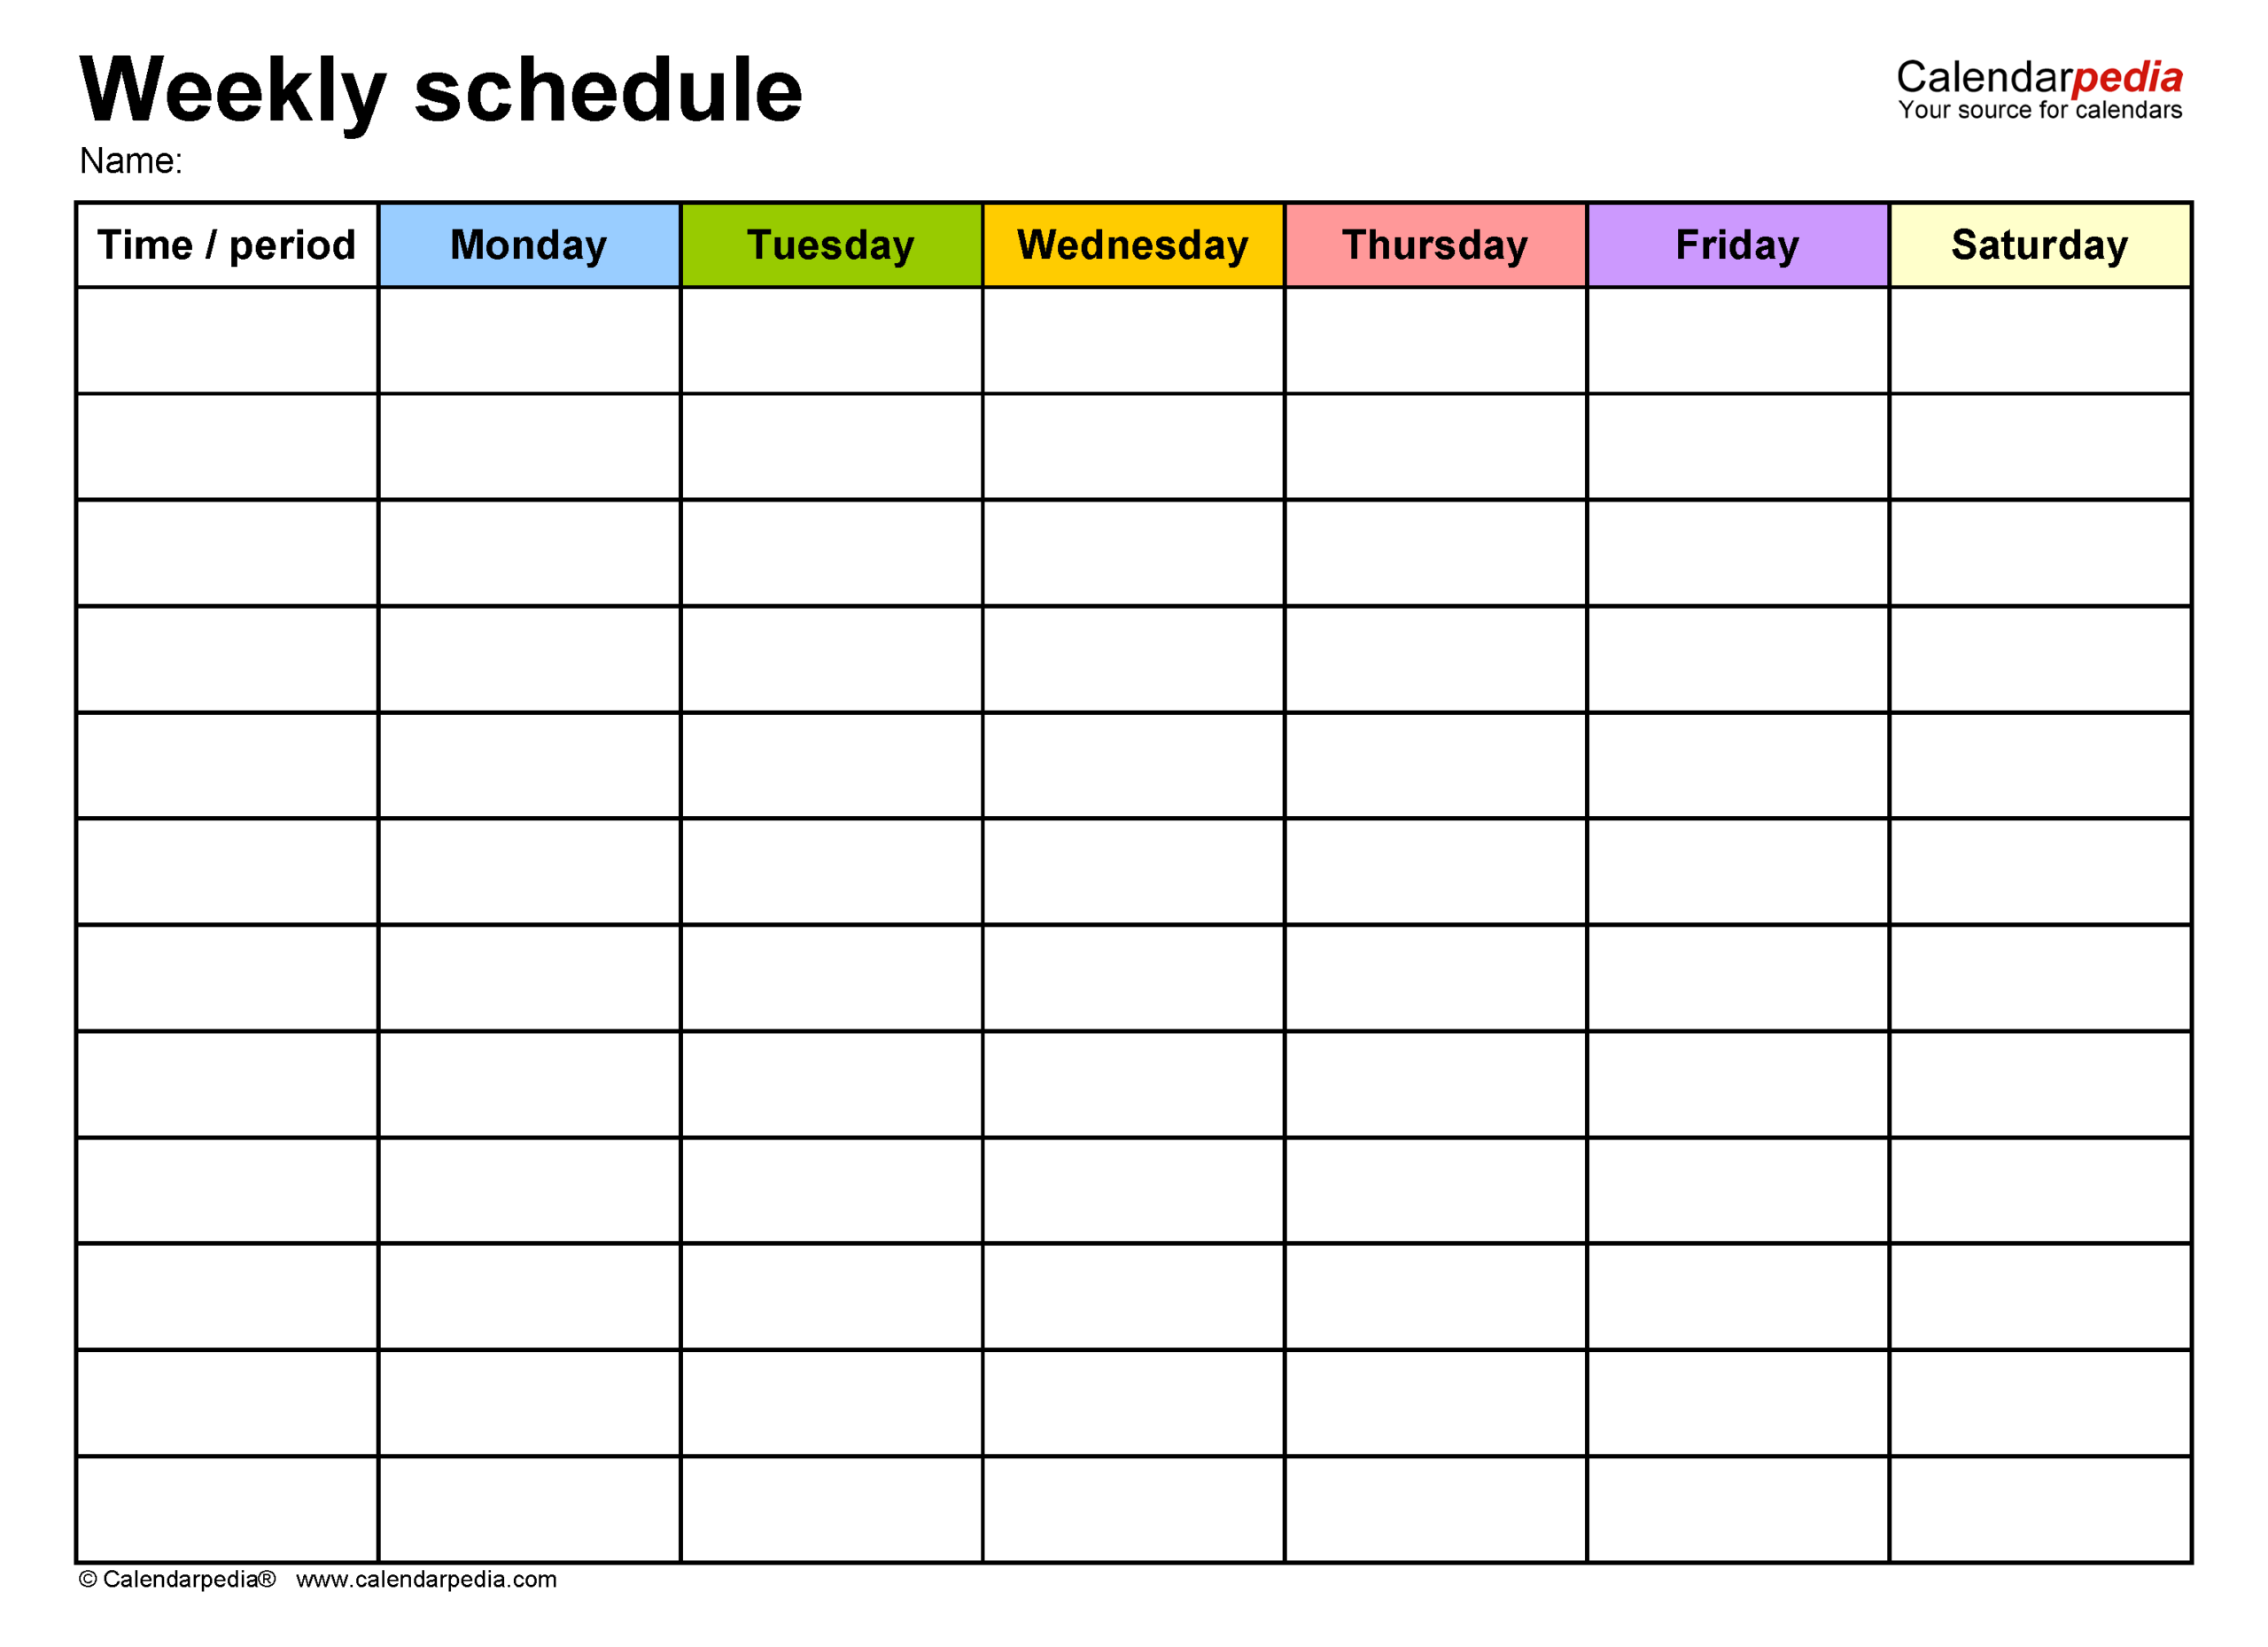 Free Weekly Schedule Templates For Word  18 Templates inside Monday Thru Friday Schedule Template